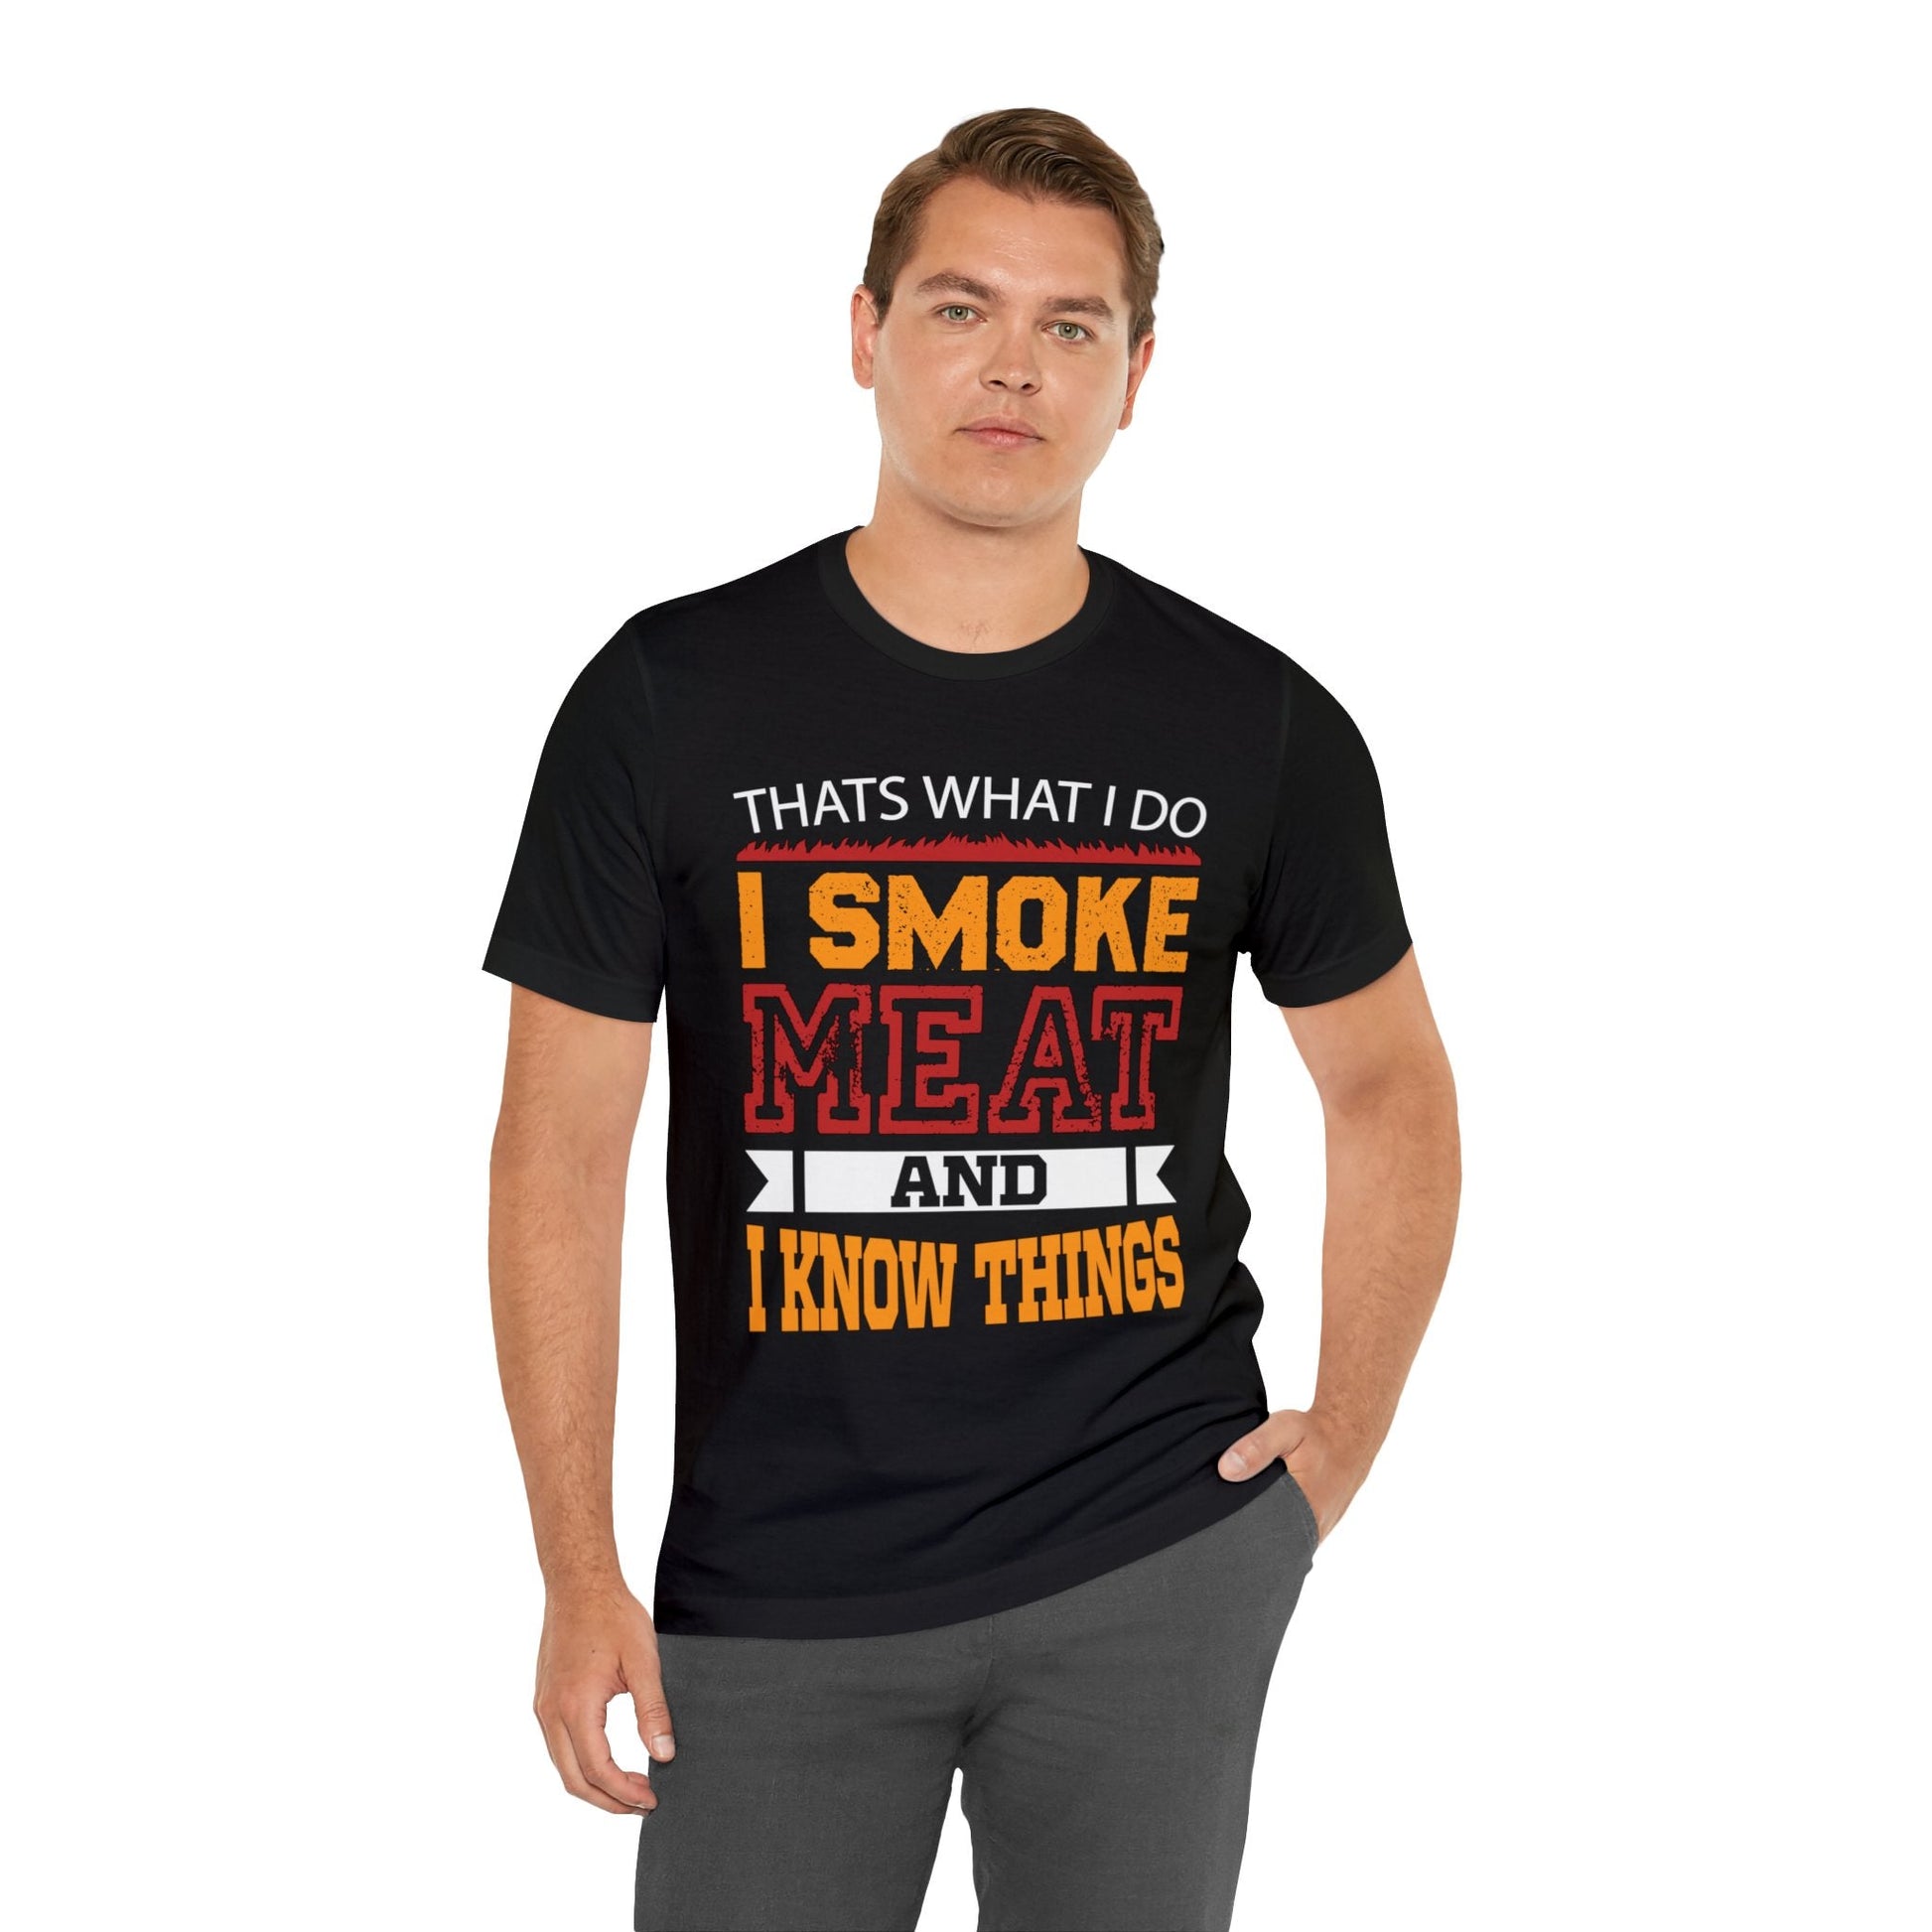 That what i do T - Shirt - The Cavemanstyle